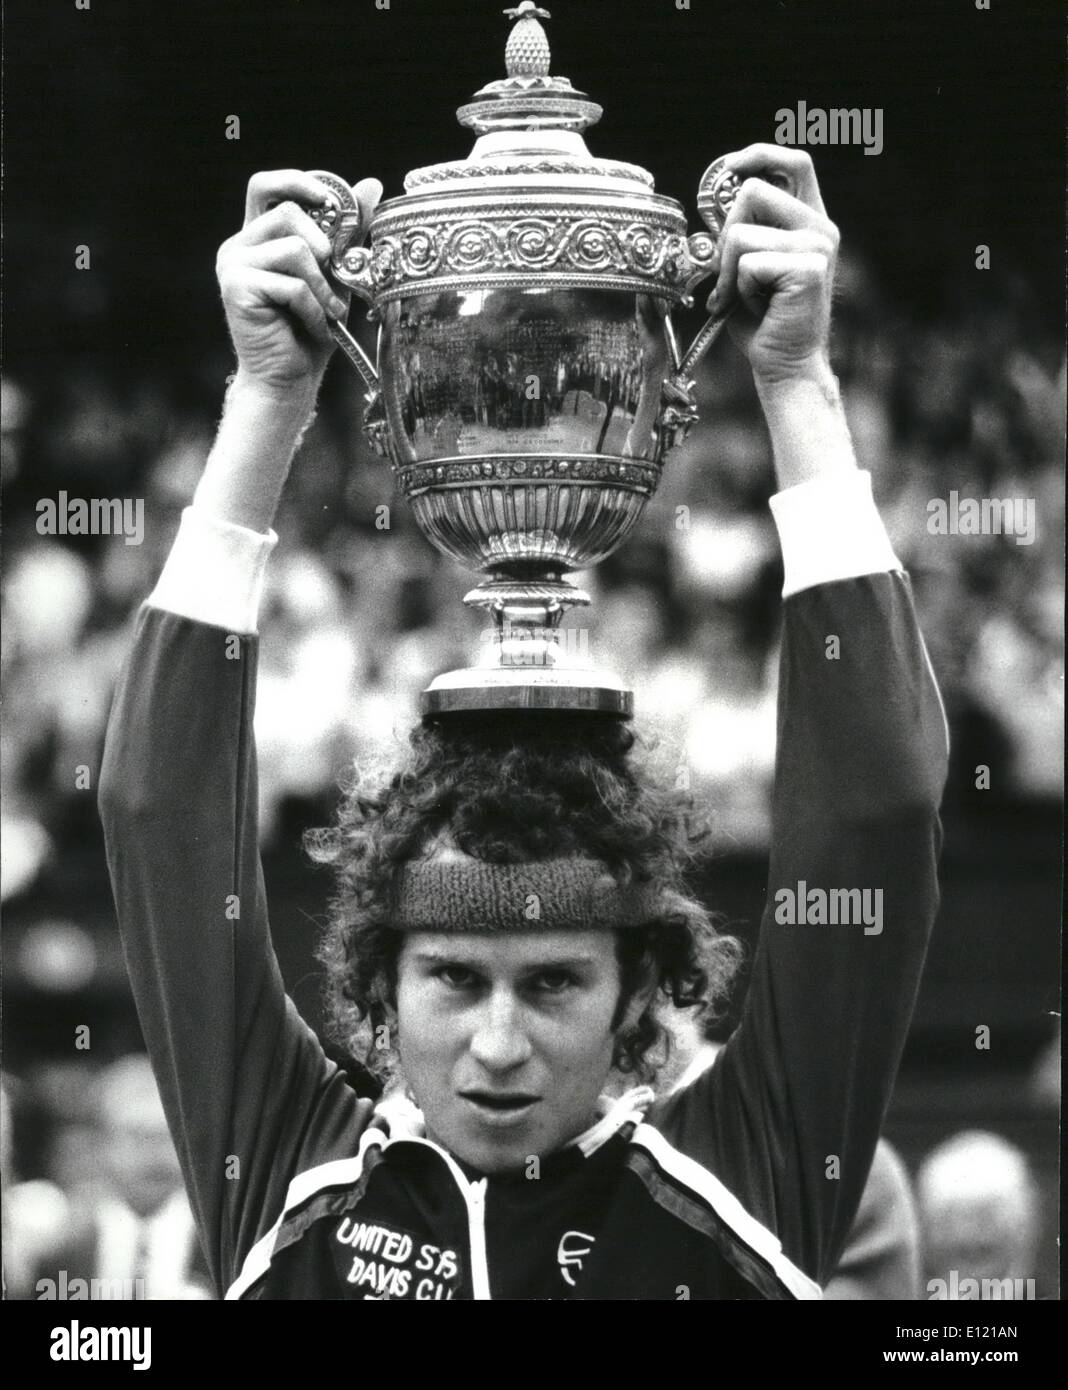 Jul. 05, 1981 - July 5th 1981 McEnroe wins the Wimbledon Title. American John McEnroe became the Wimbledon champion on Saturday when he beat the holder of the title for the last five years, Bjorn Borg. 6-4, 6-7, 6-7, 4-6. Photo Shows: John McEnroe holds up the trophy after beating the holder Bjorn Borg n the men's singles final on the centre court at Wimbledon. Stock Photo